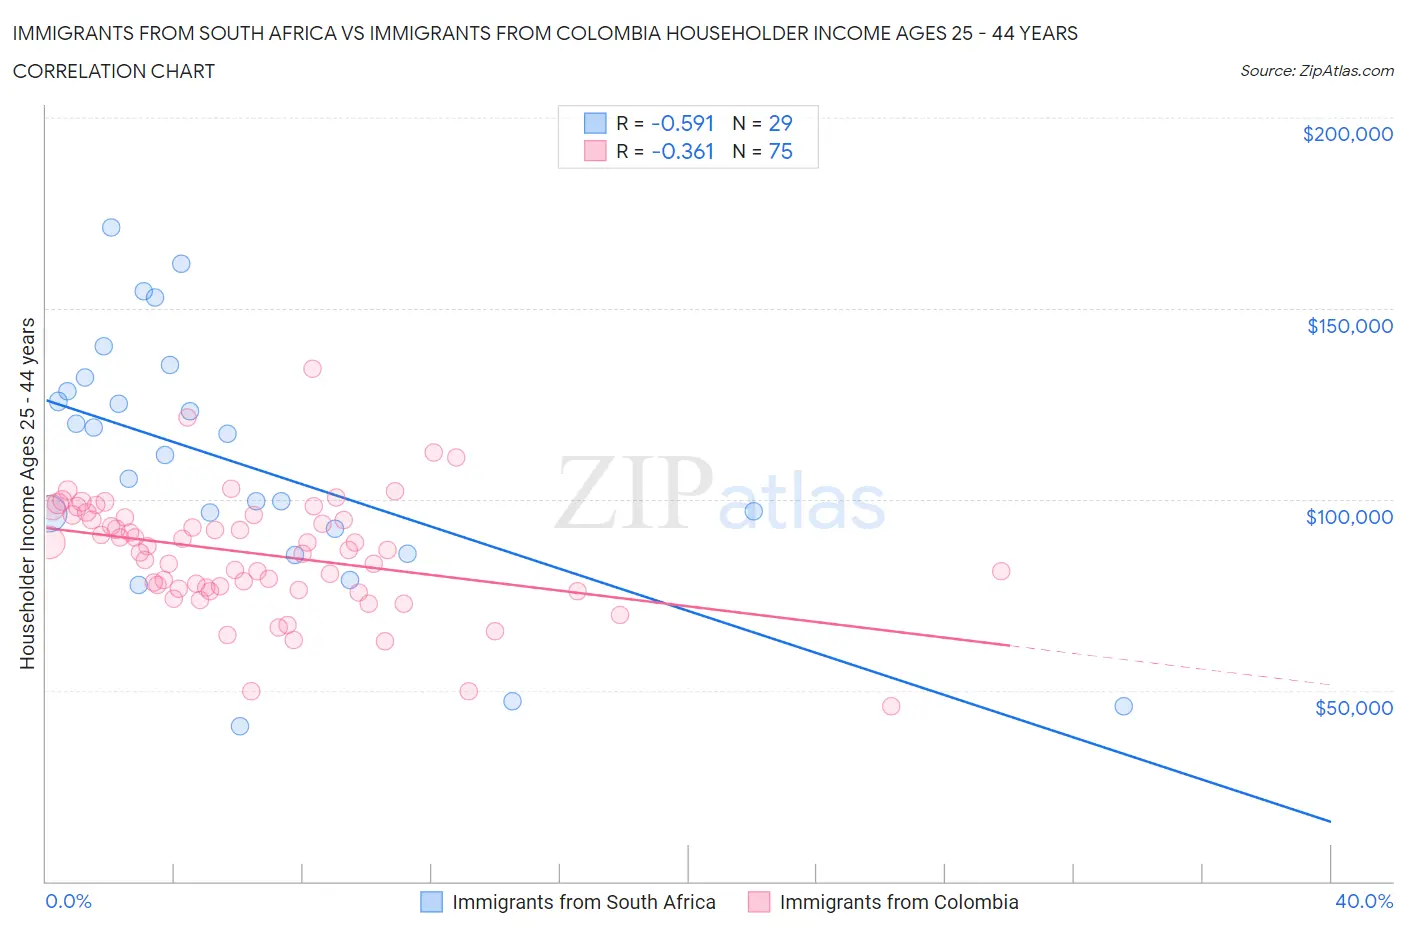 Immigrants from South Africa vs Immigrants from Colombia Householder Income Ages 25 - 44 years